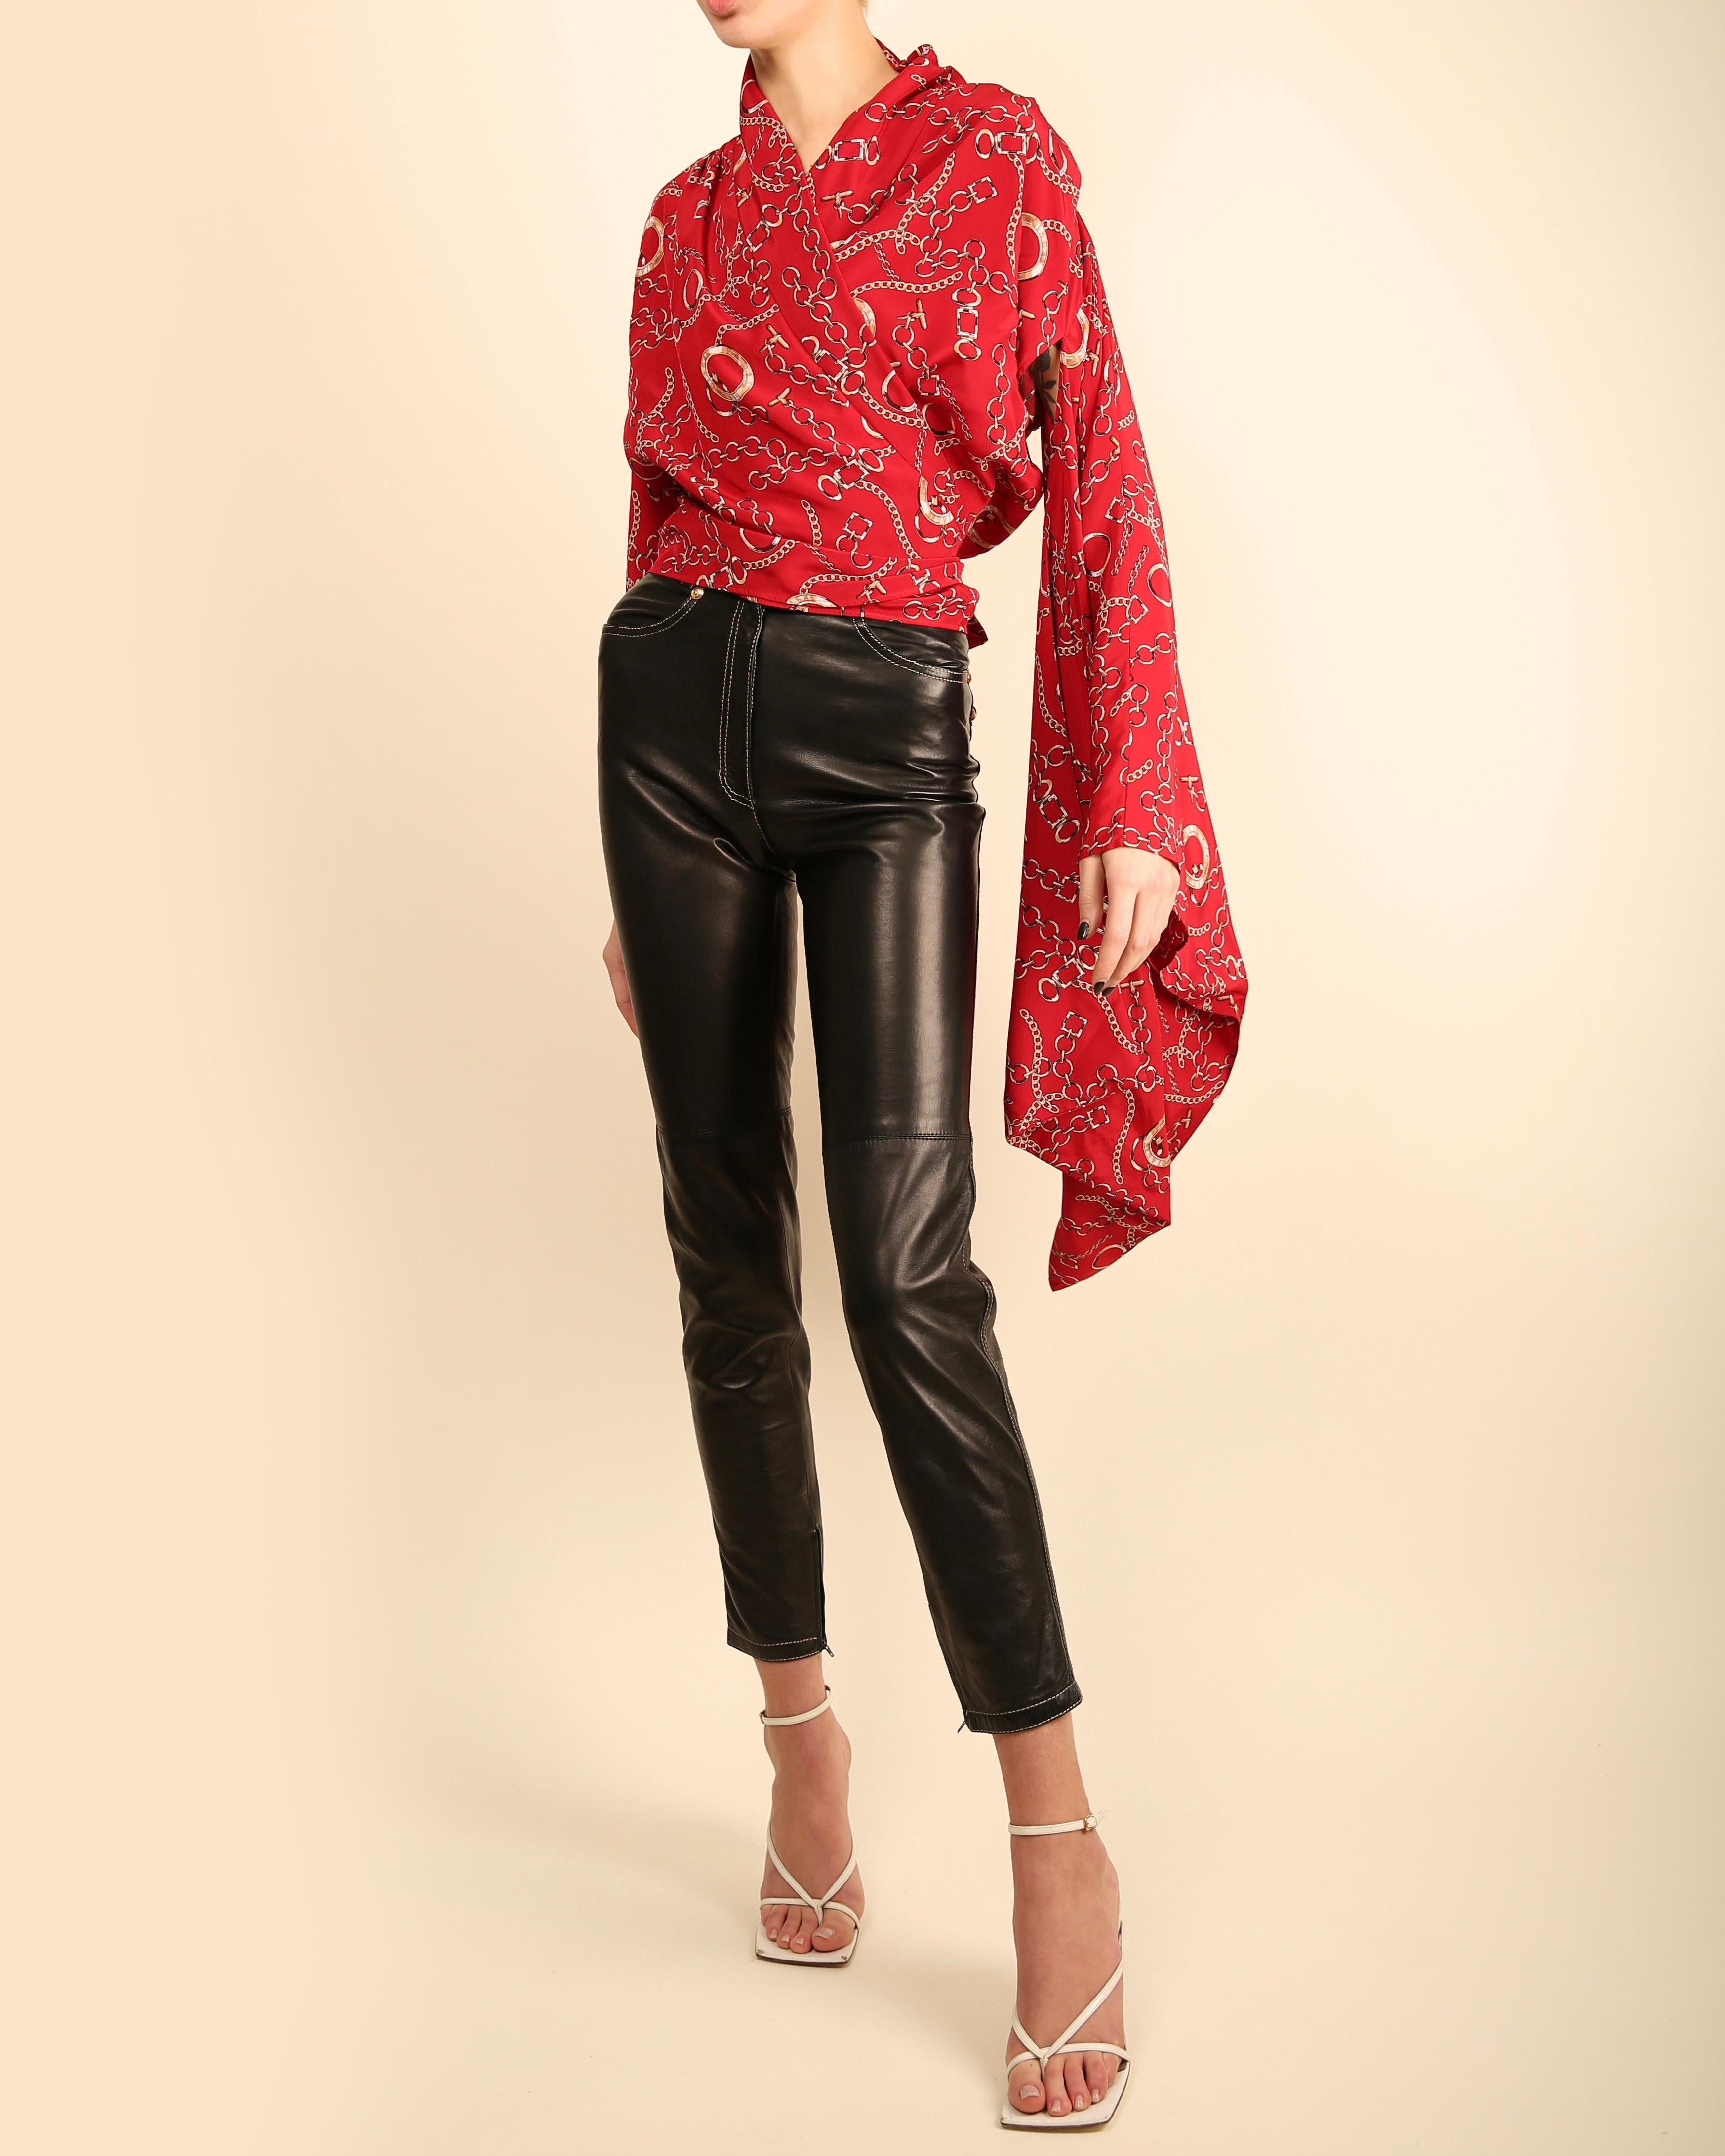 Balenciaga oversized silk blouse in red with gold chain equestrian print
One shoulder has a shoulder pad with a normal sleeve. The other has no shoulder pad and a large oversized kimono sleeve
Wrap closure at waist with long ties
MADE IN